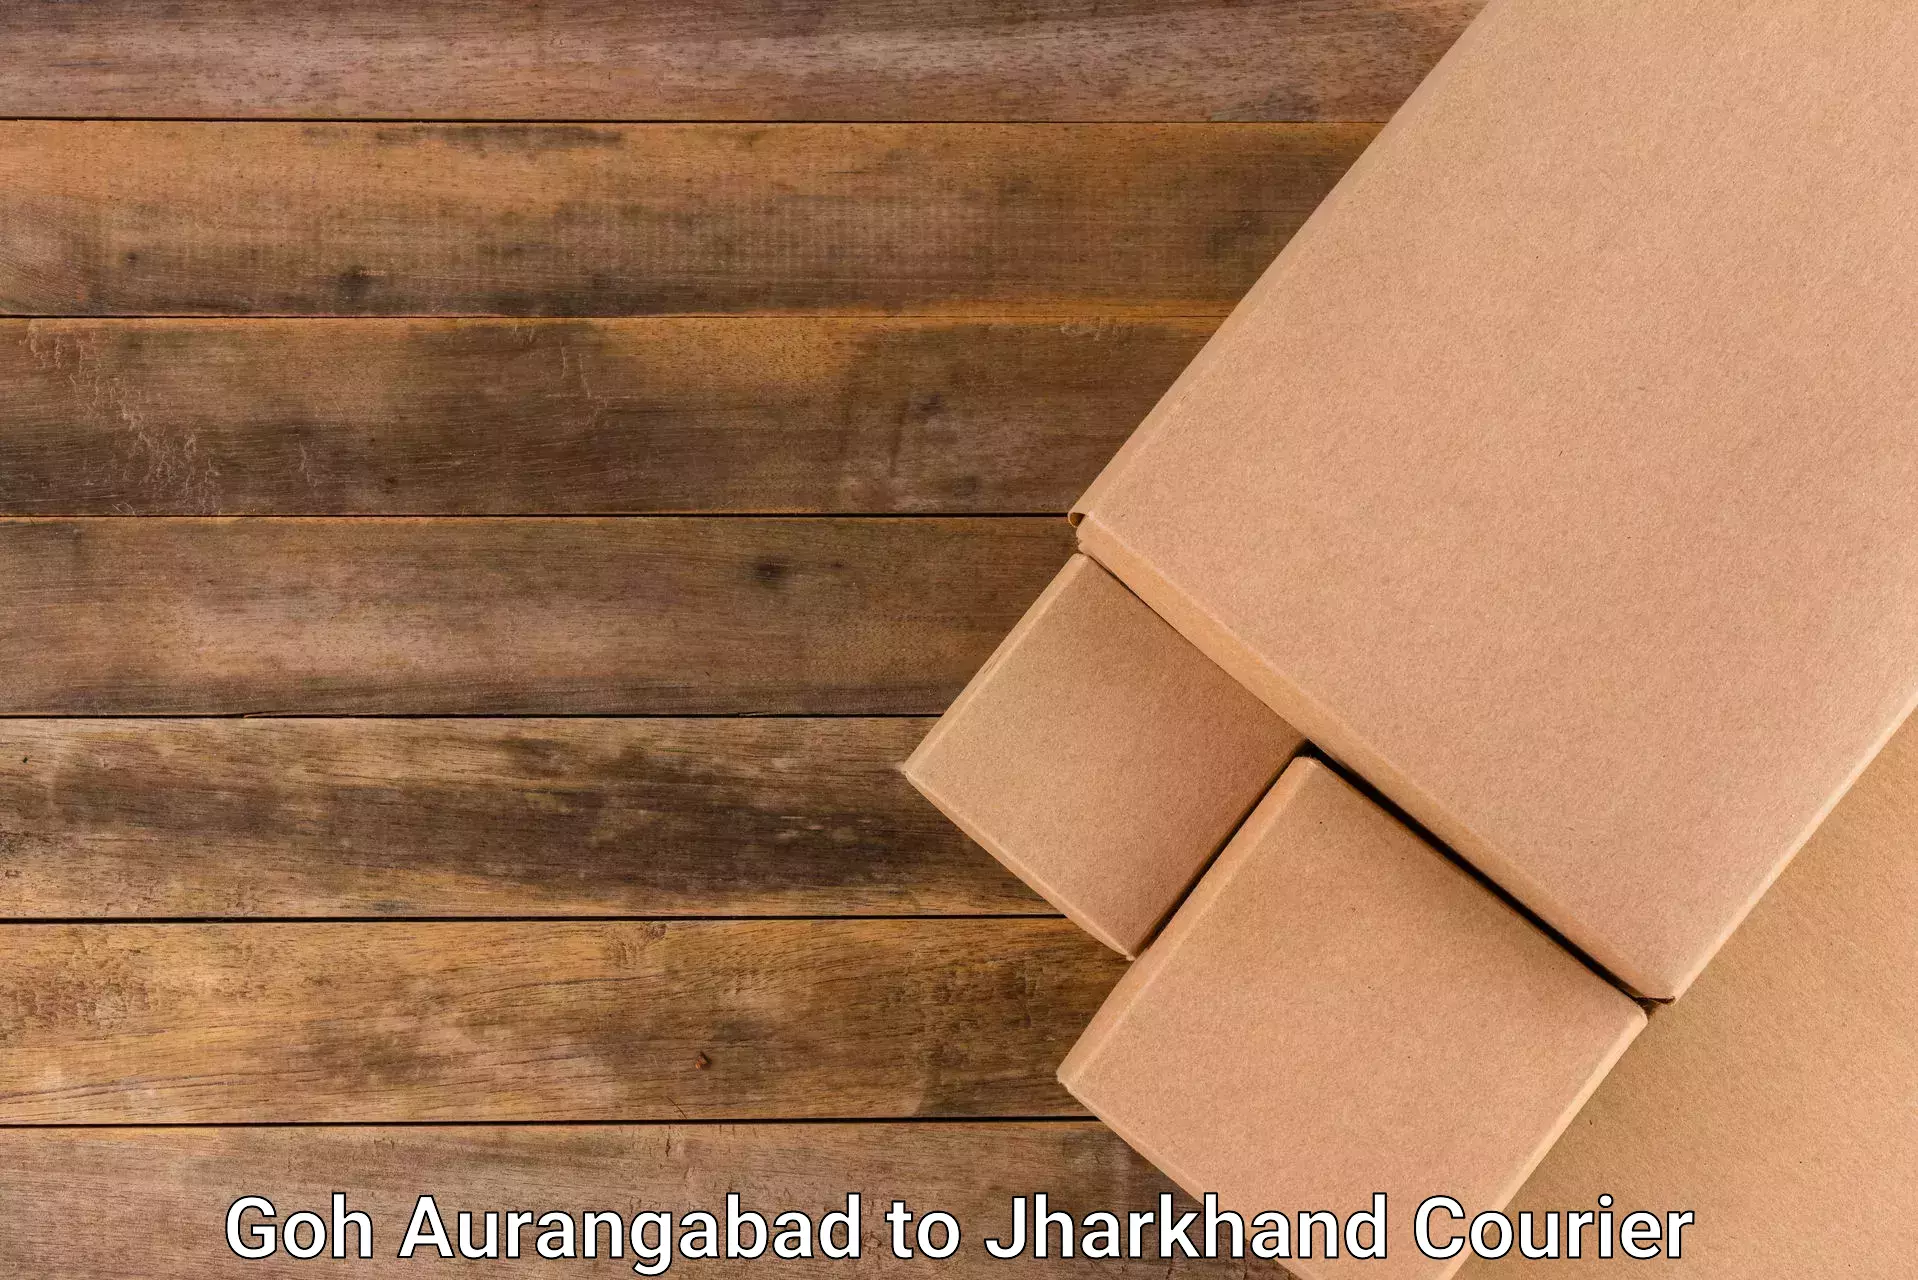 Next-day delivery options Goh Aurangabad to Jharkhand